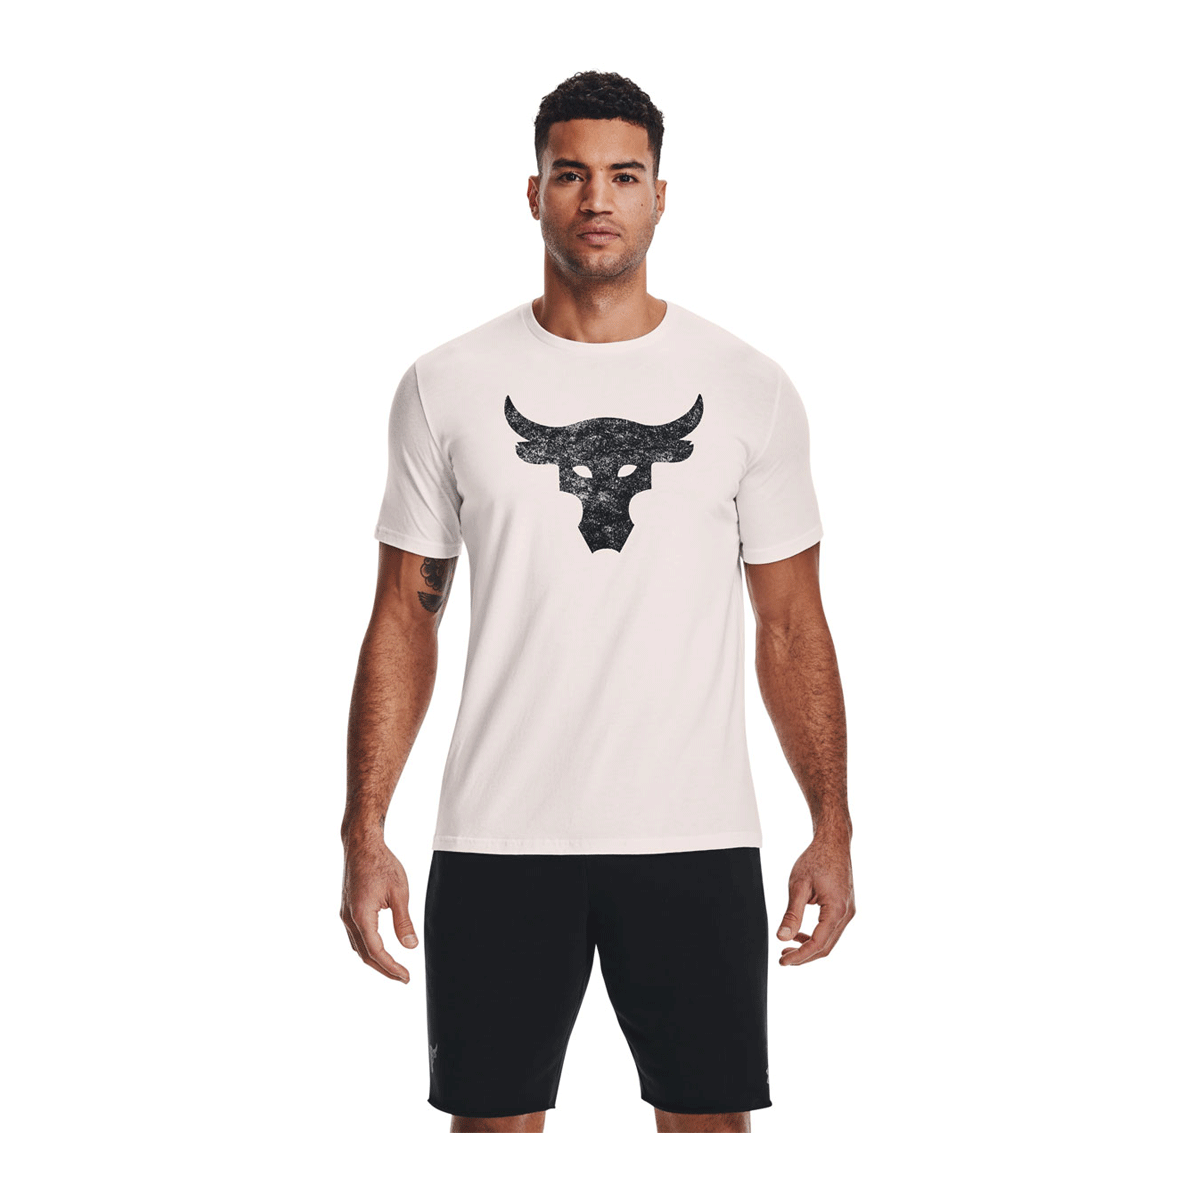  Under Armour Men's PROJECT ROCK Bull Graphic Short